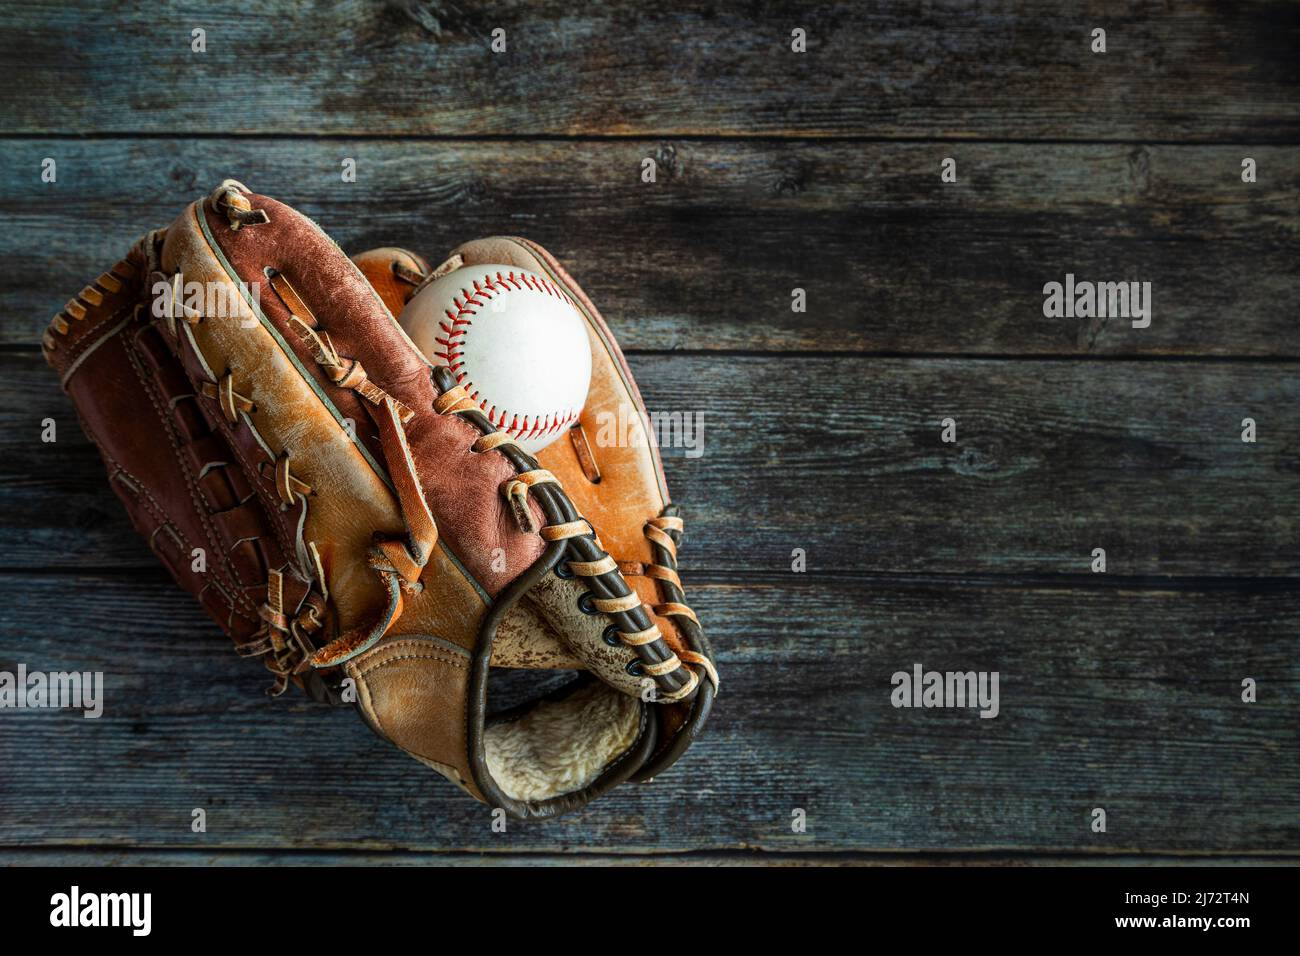 Leather baseball or softball glove with ball on rustic wooden background with copy space. Stock Photo